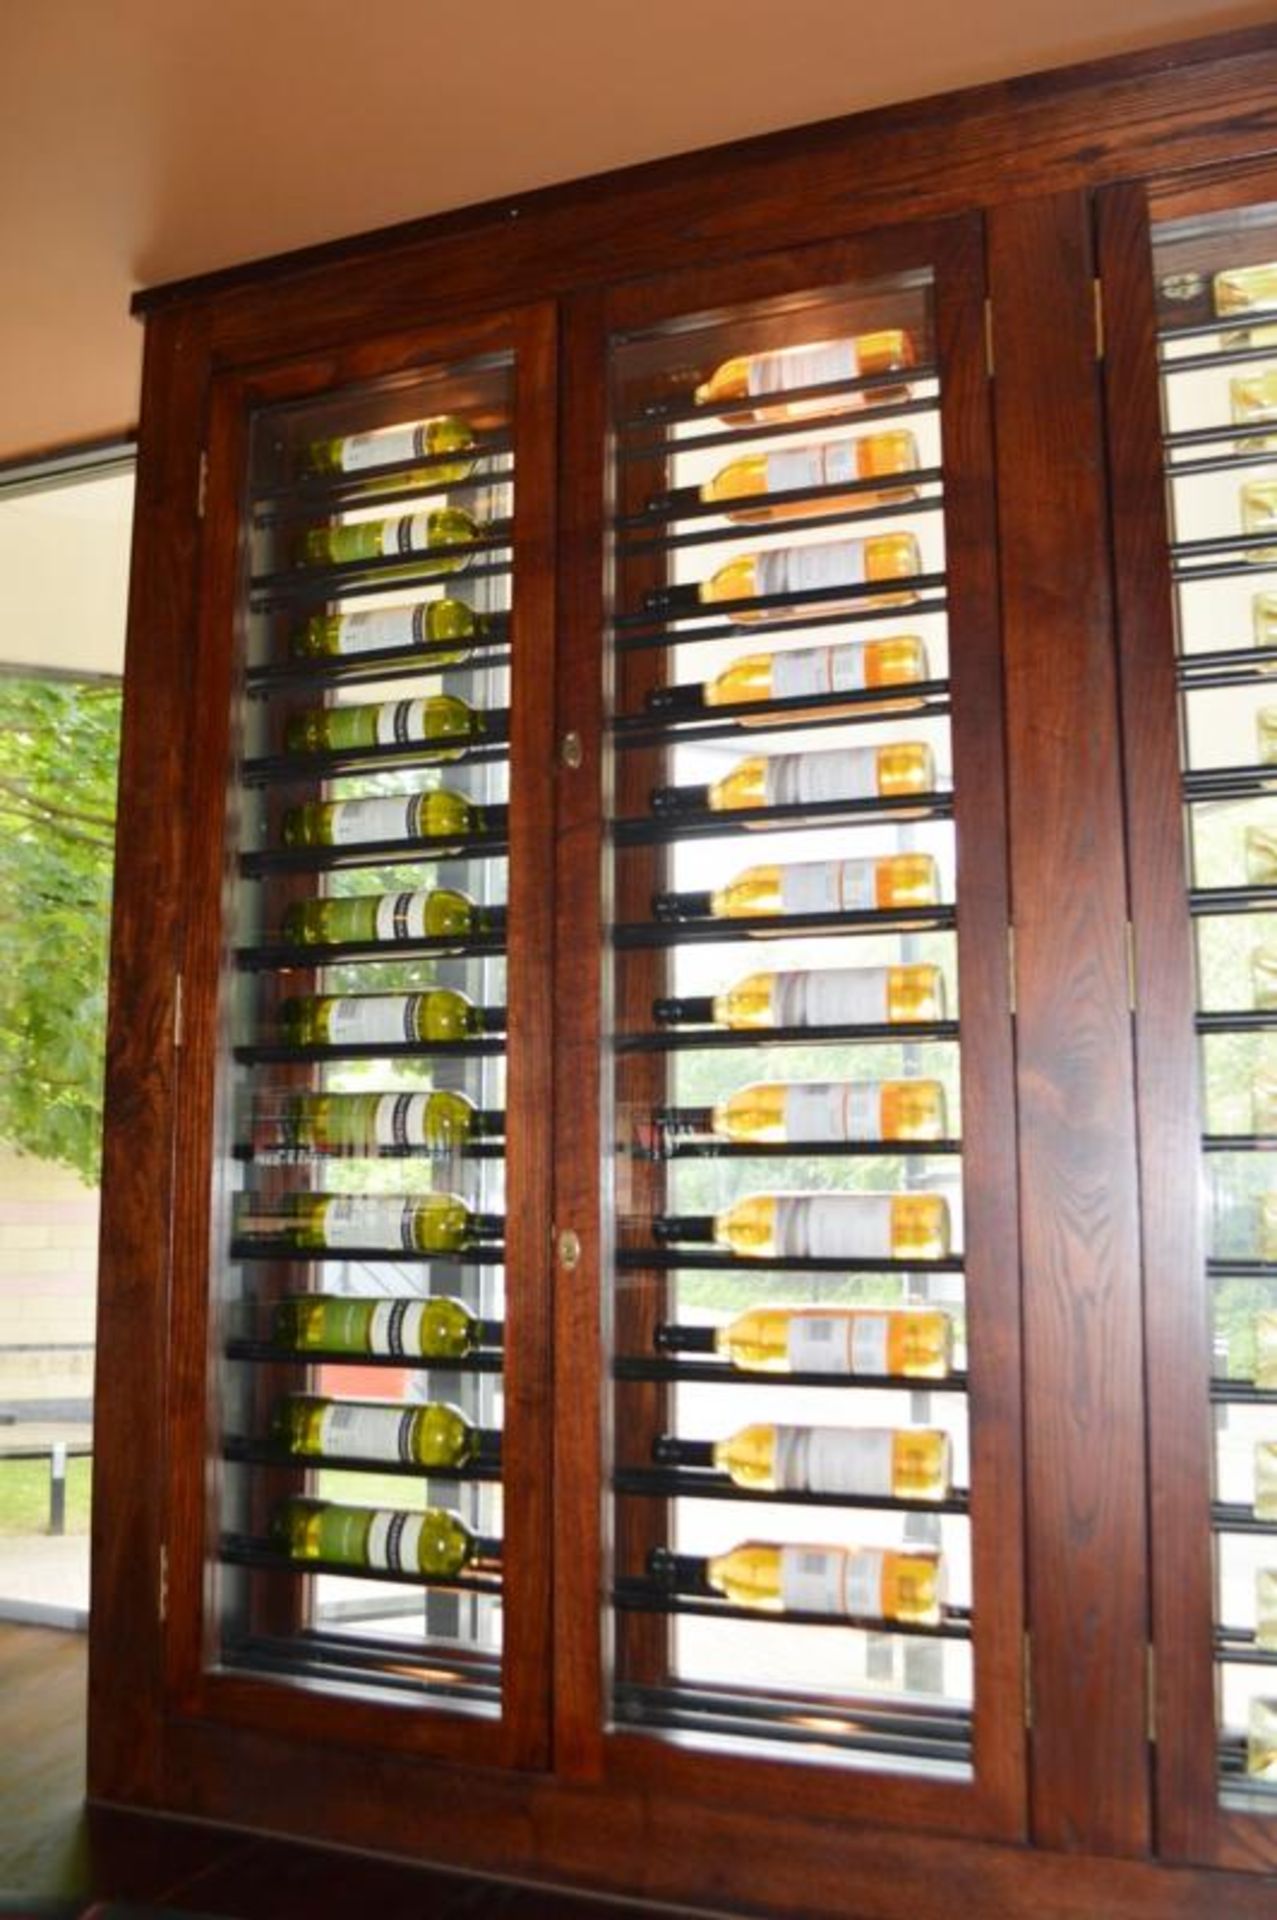 1 x Large Four Door Wine Bottle Display Cabinet With a 52 Bottle Capacity - H175 x W210 x D22 - Image 5 of 6